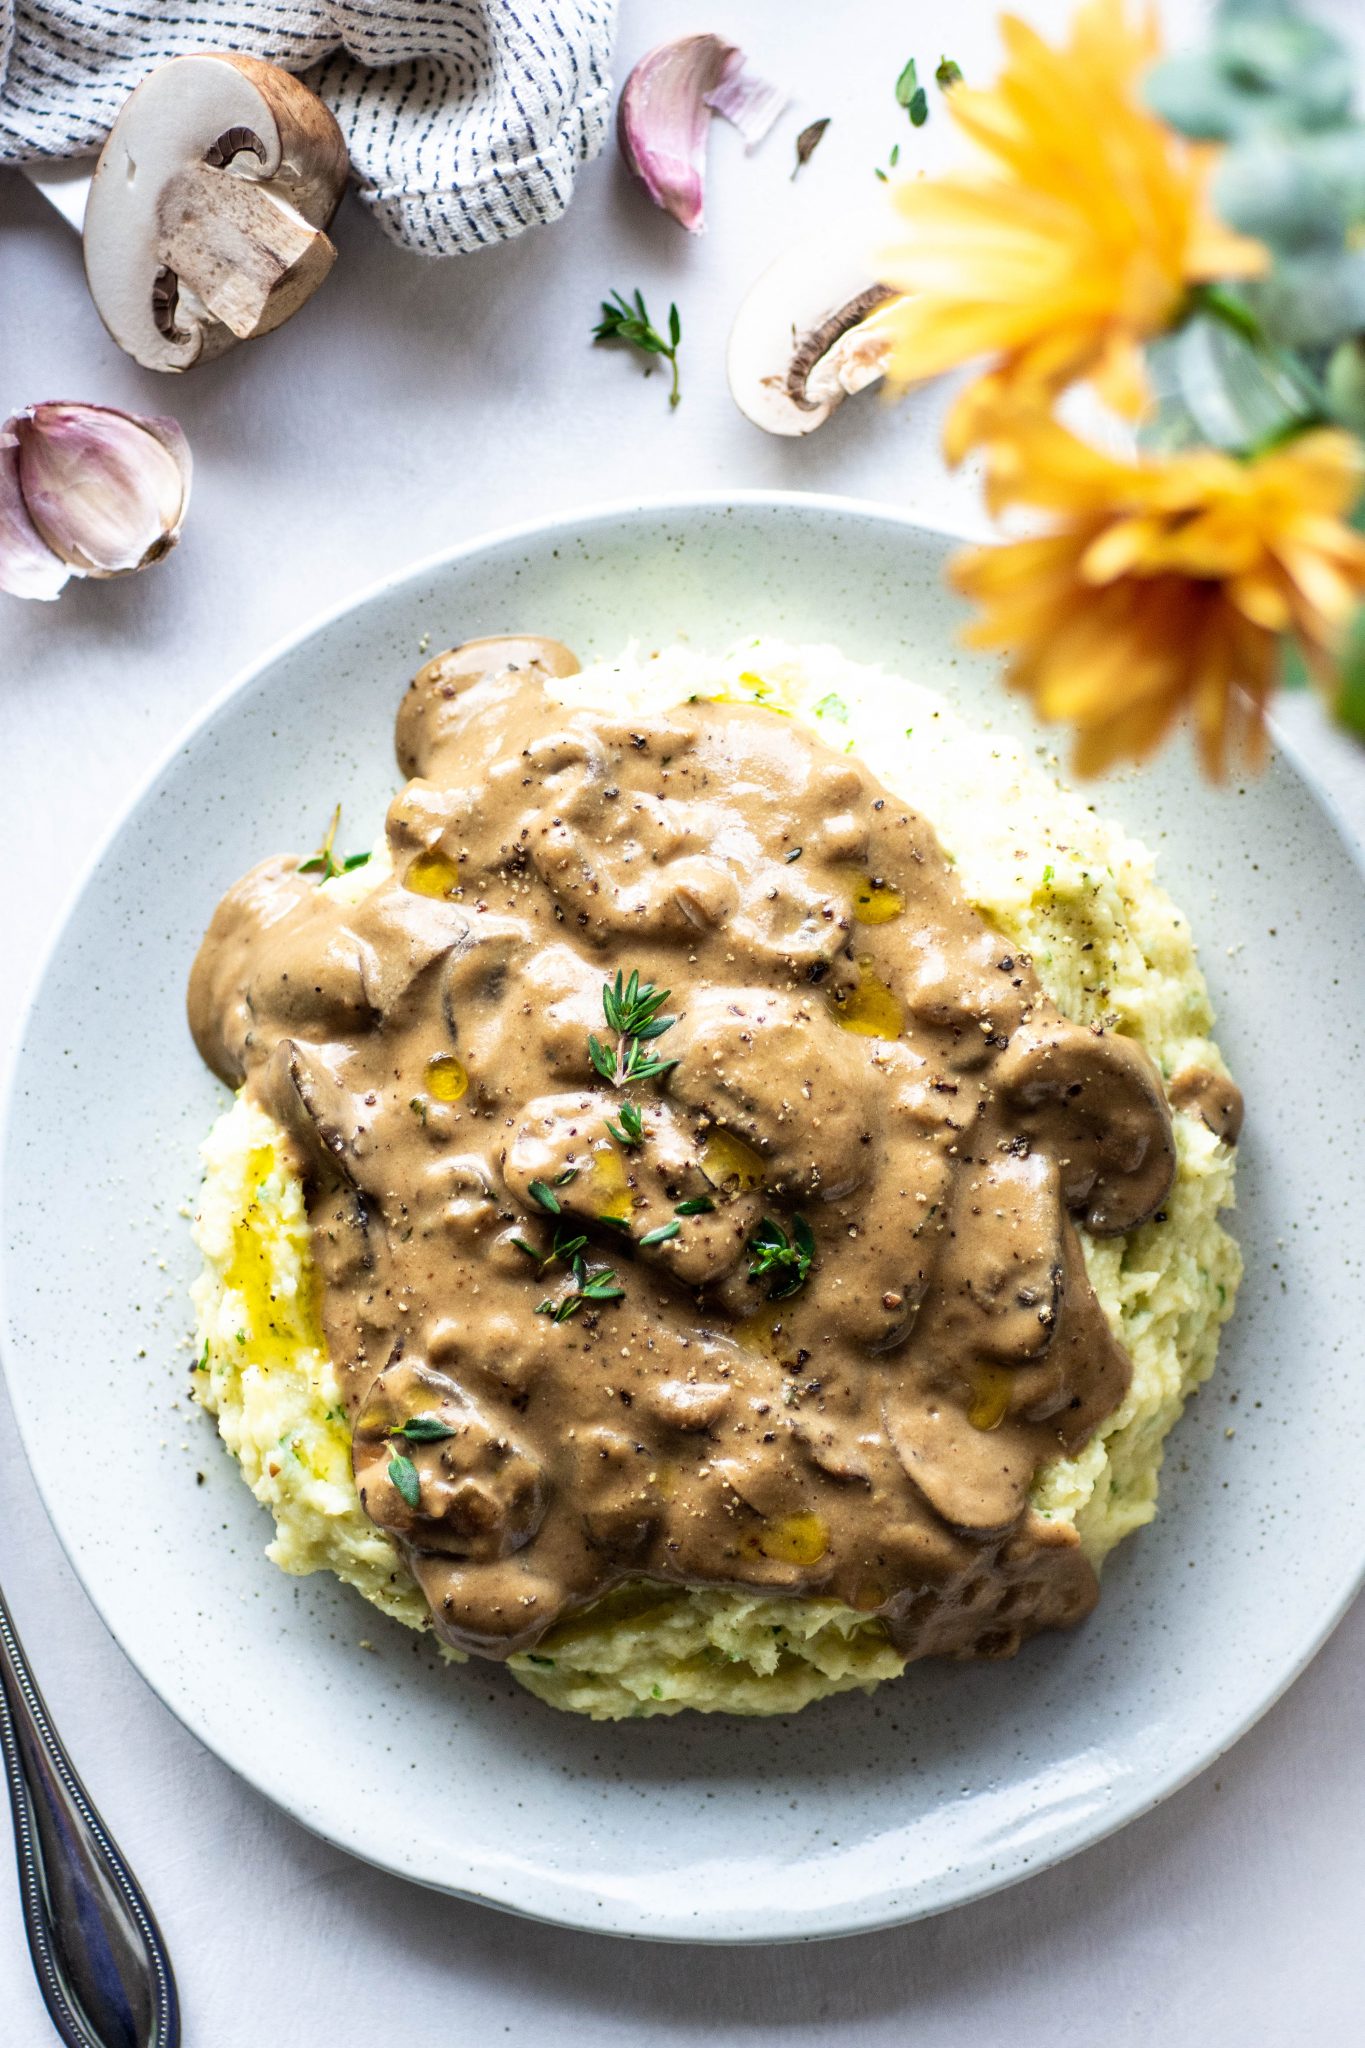 This gluten free and vegan mushroom gravy is the stuff that dreams are made of. Creamy, rich and flavorful, without any gluten or dairy. Make ahead friendly and an easy, healthy recipe that's perfect for the holidays! Gluten free, paleo, vegan and whole30 approved - a crazy delicious gravy for everyone at your table.